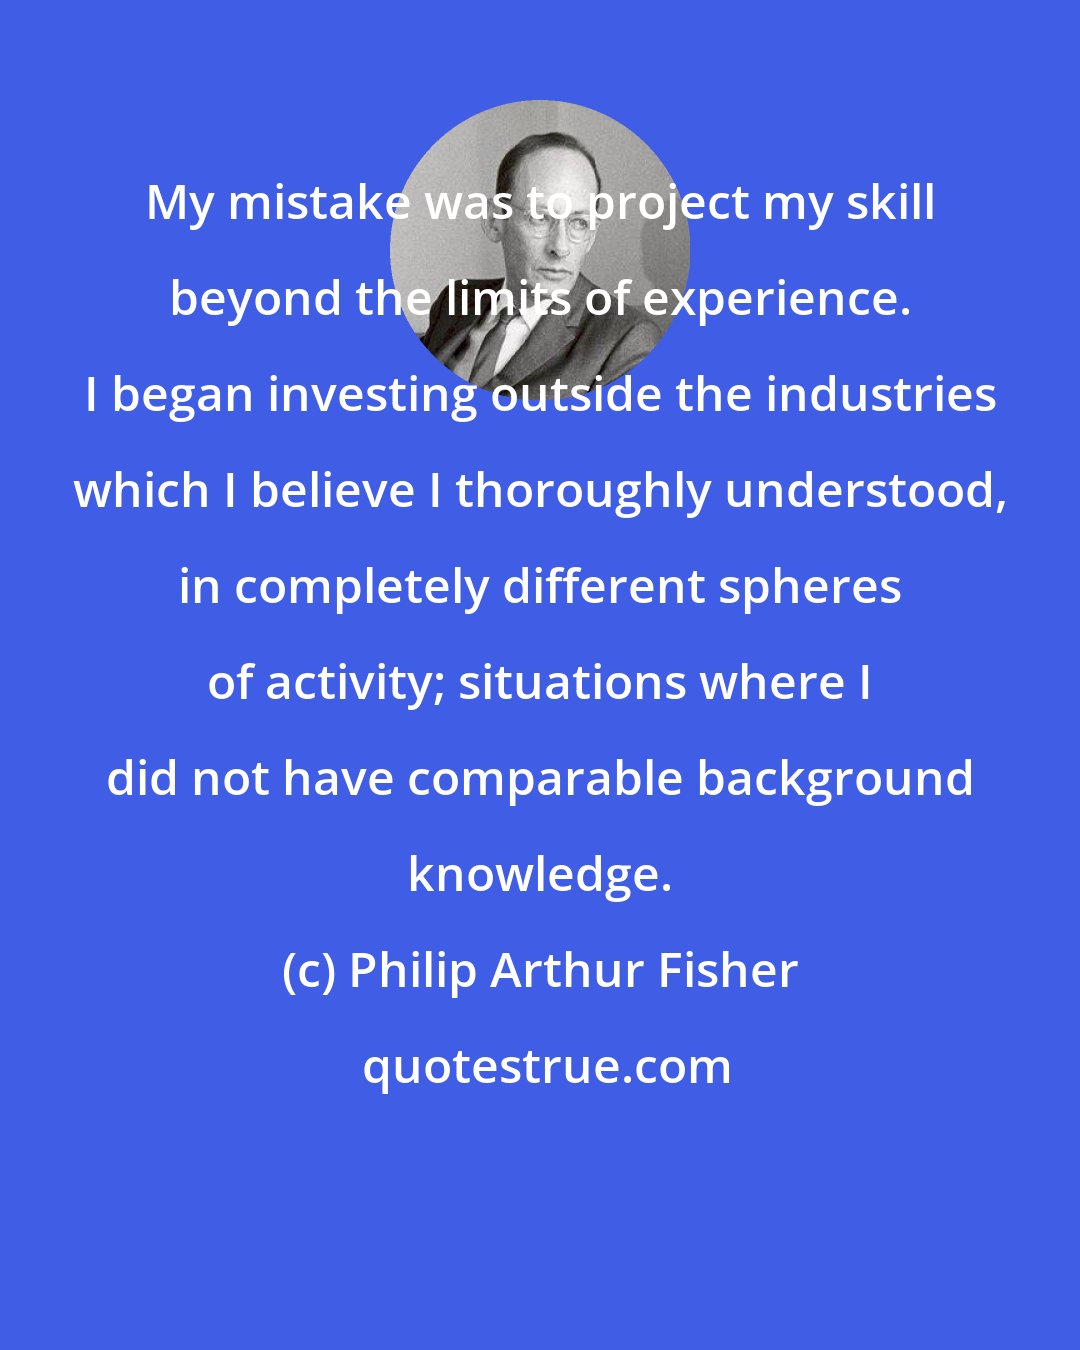 Philip Arthur Fisher: My mistake was to project my skill beyond the limits of experience. I began investing outside the industries which I believe I thoroughly understood, in completely different spheres of activity; situations where I did not have comparable background knowledge.